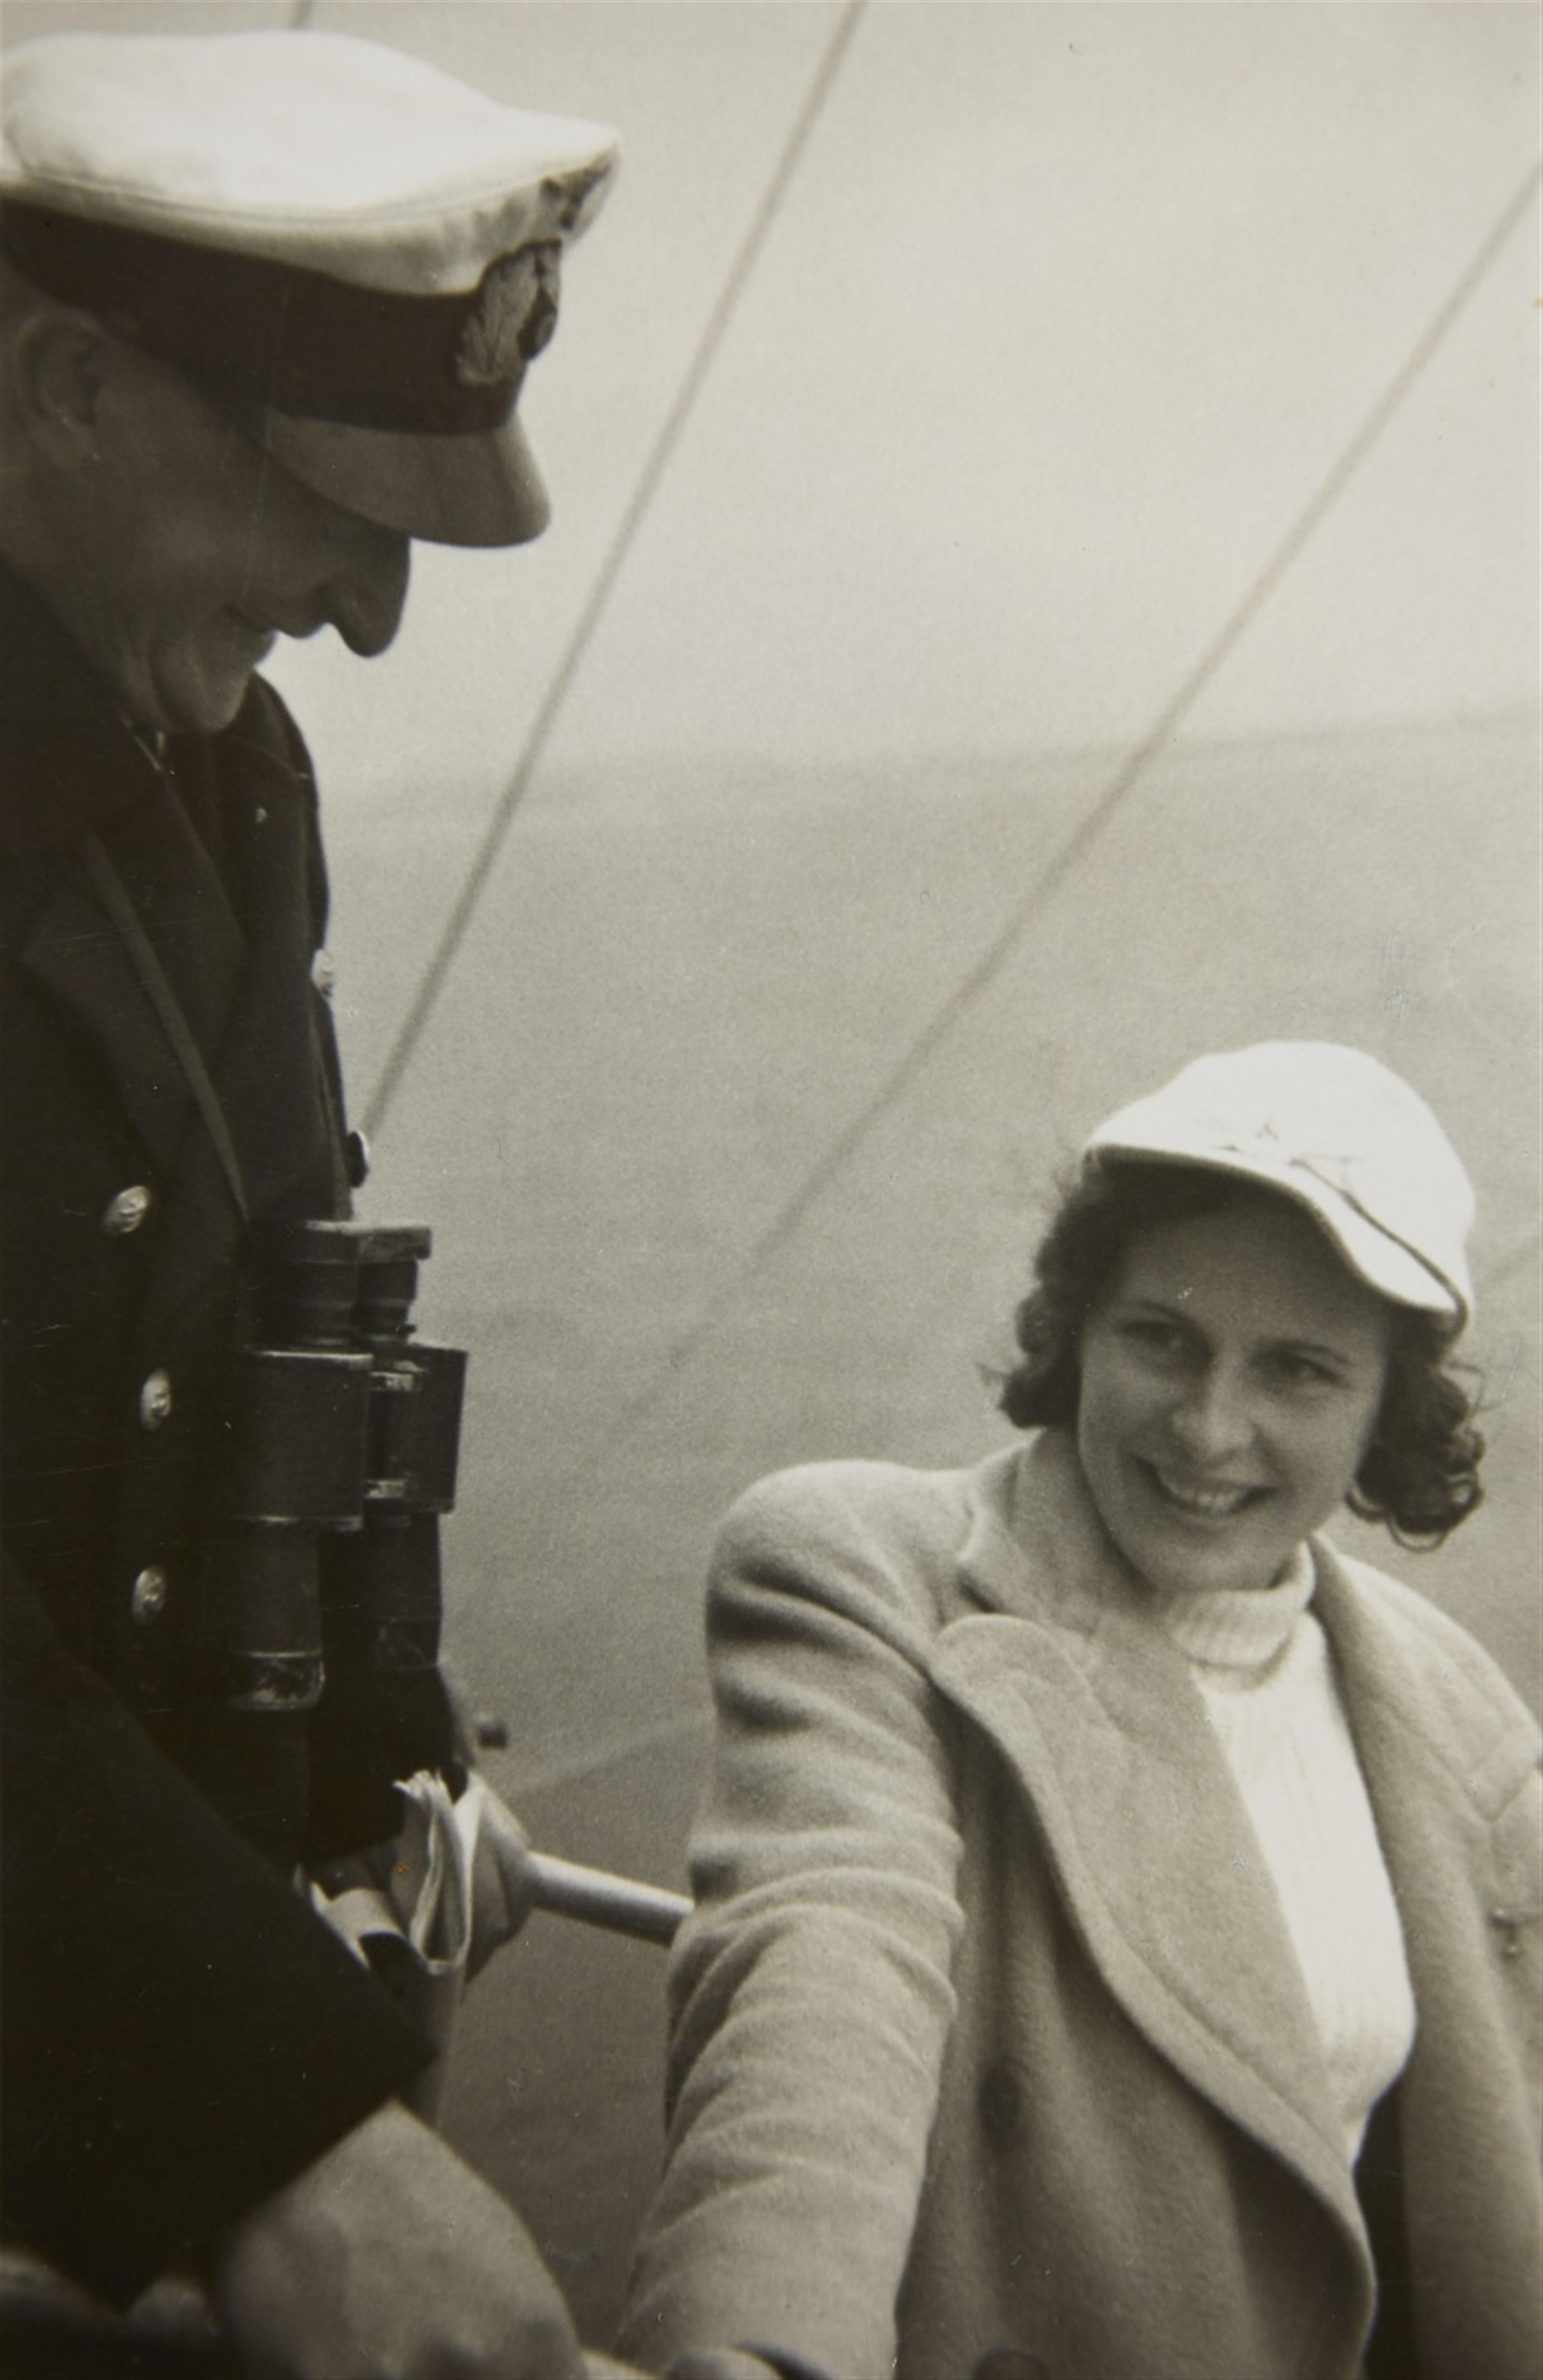 Diverse Photographen - Leni Riefenstahl beim Dreh des "Olympia"-Films (Leni Riefenstahl during the filming of "Olympia") - image-1